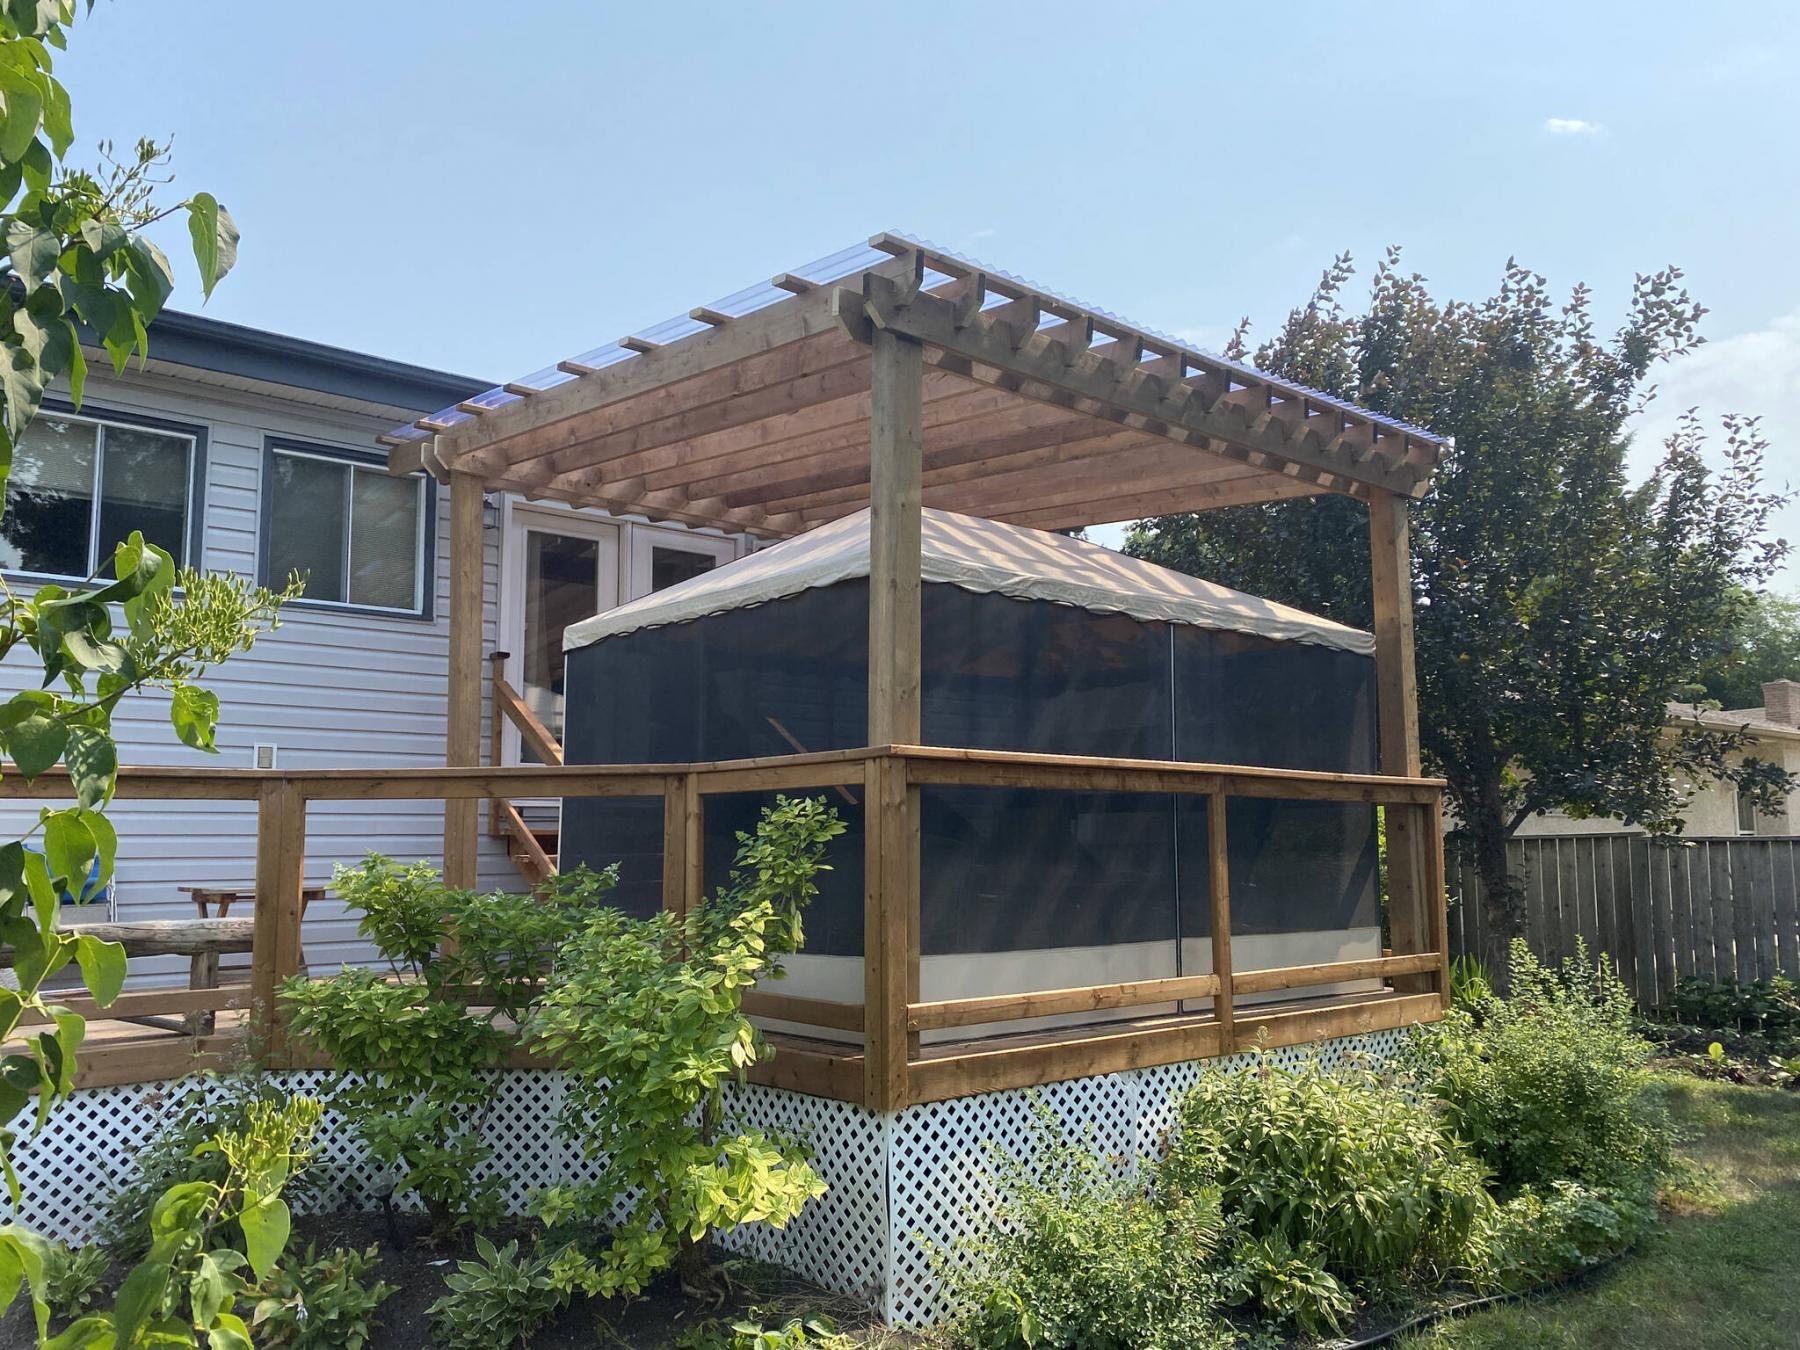 <p>Photos by Marc LaBossiere / Winnipeg Free Press Clear corrugated panels are affixed to the 2x4s atop the 2x8 veins, supported by 2x8 tandem beams mounted to 6x6 posts.</p>